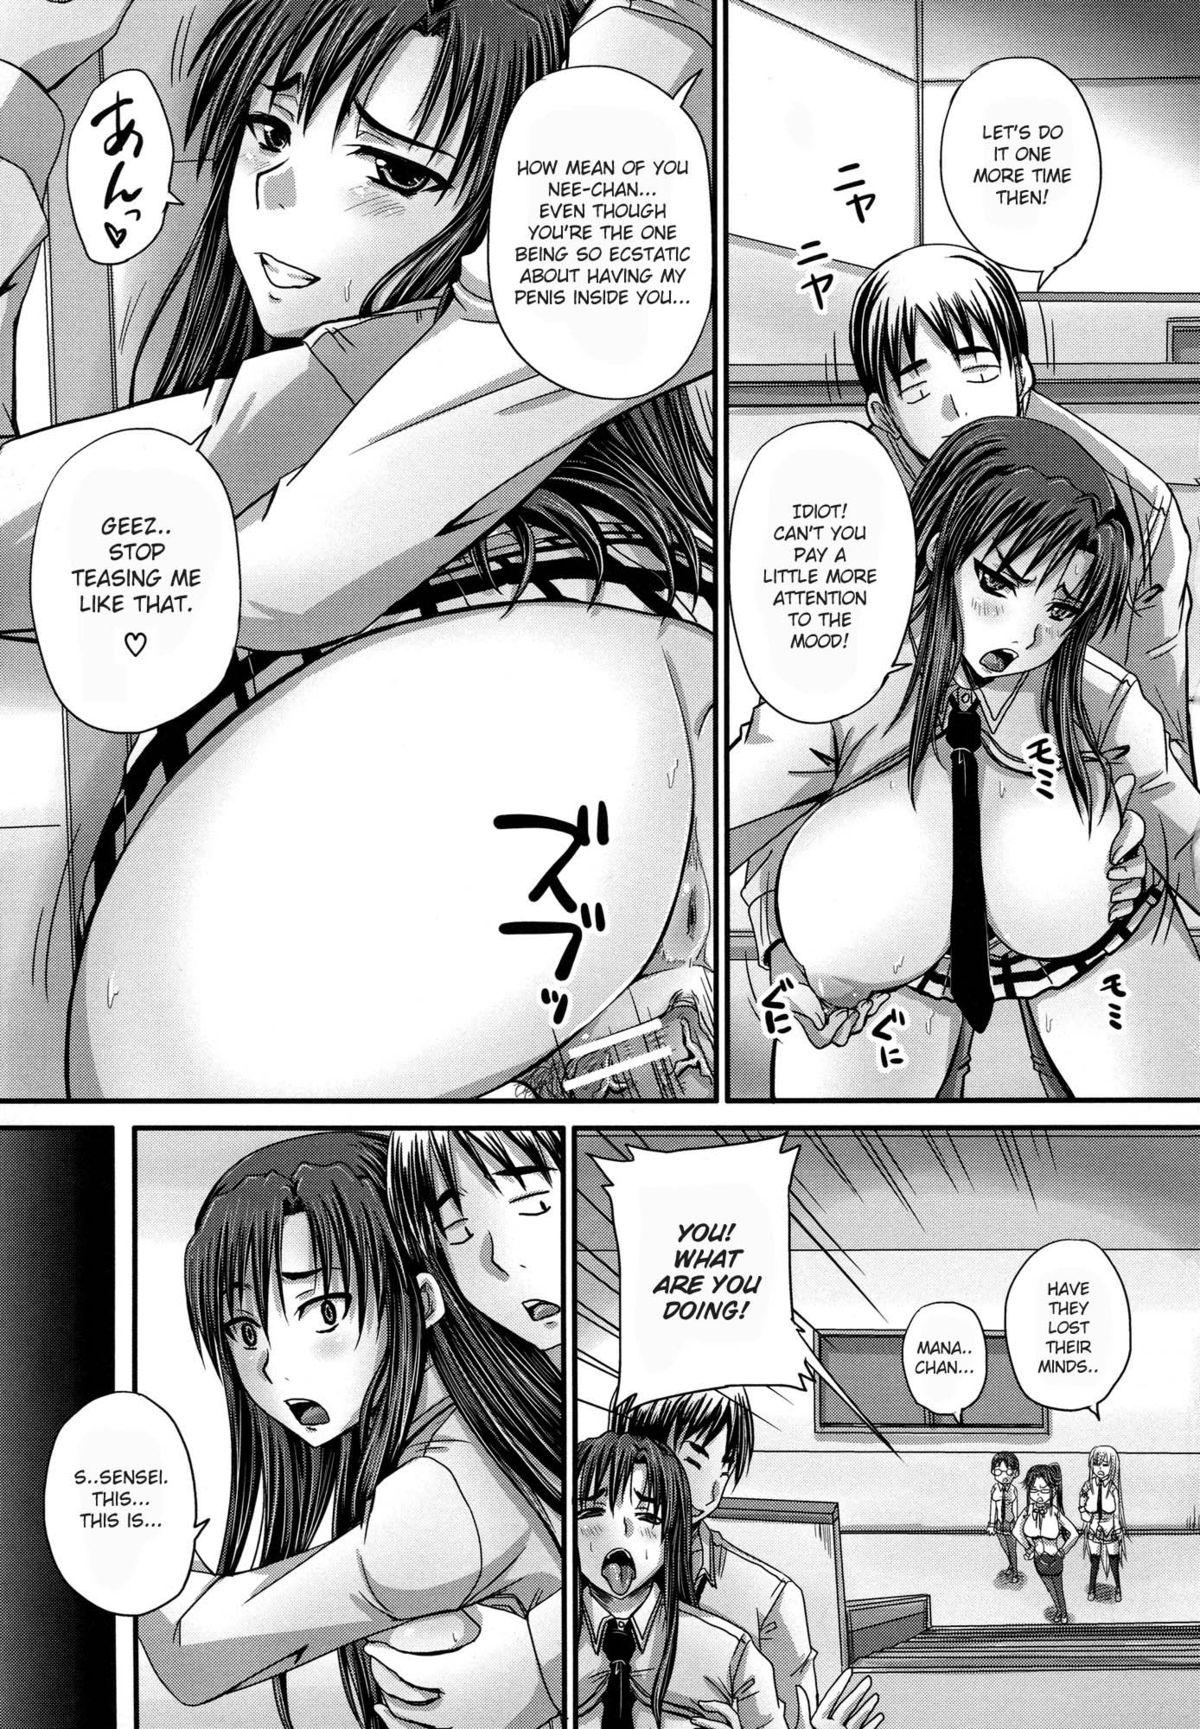 [Akigami Satoru] Tsukurou! Onaho Ane - Let's made a Sex Sleeve from Sister Ch. 1-2 [English] [snowshoes] 60